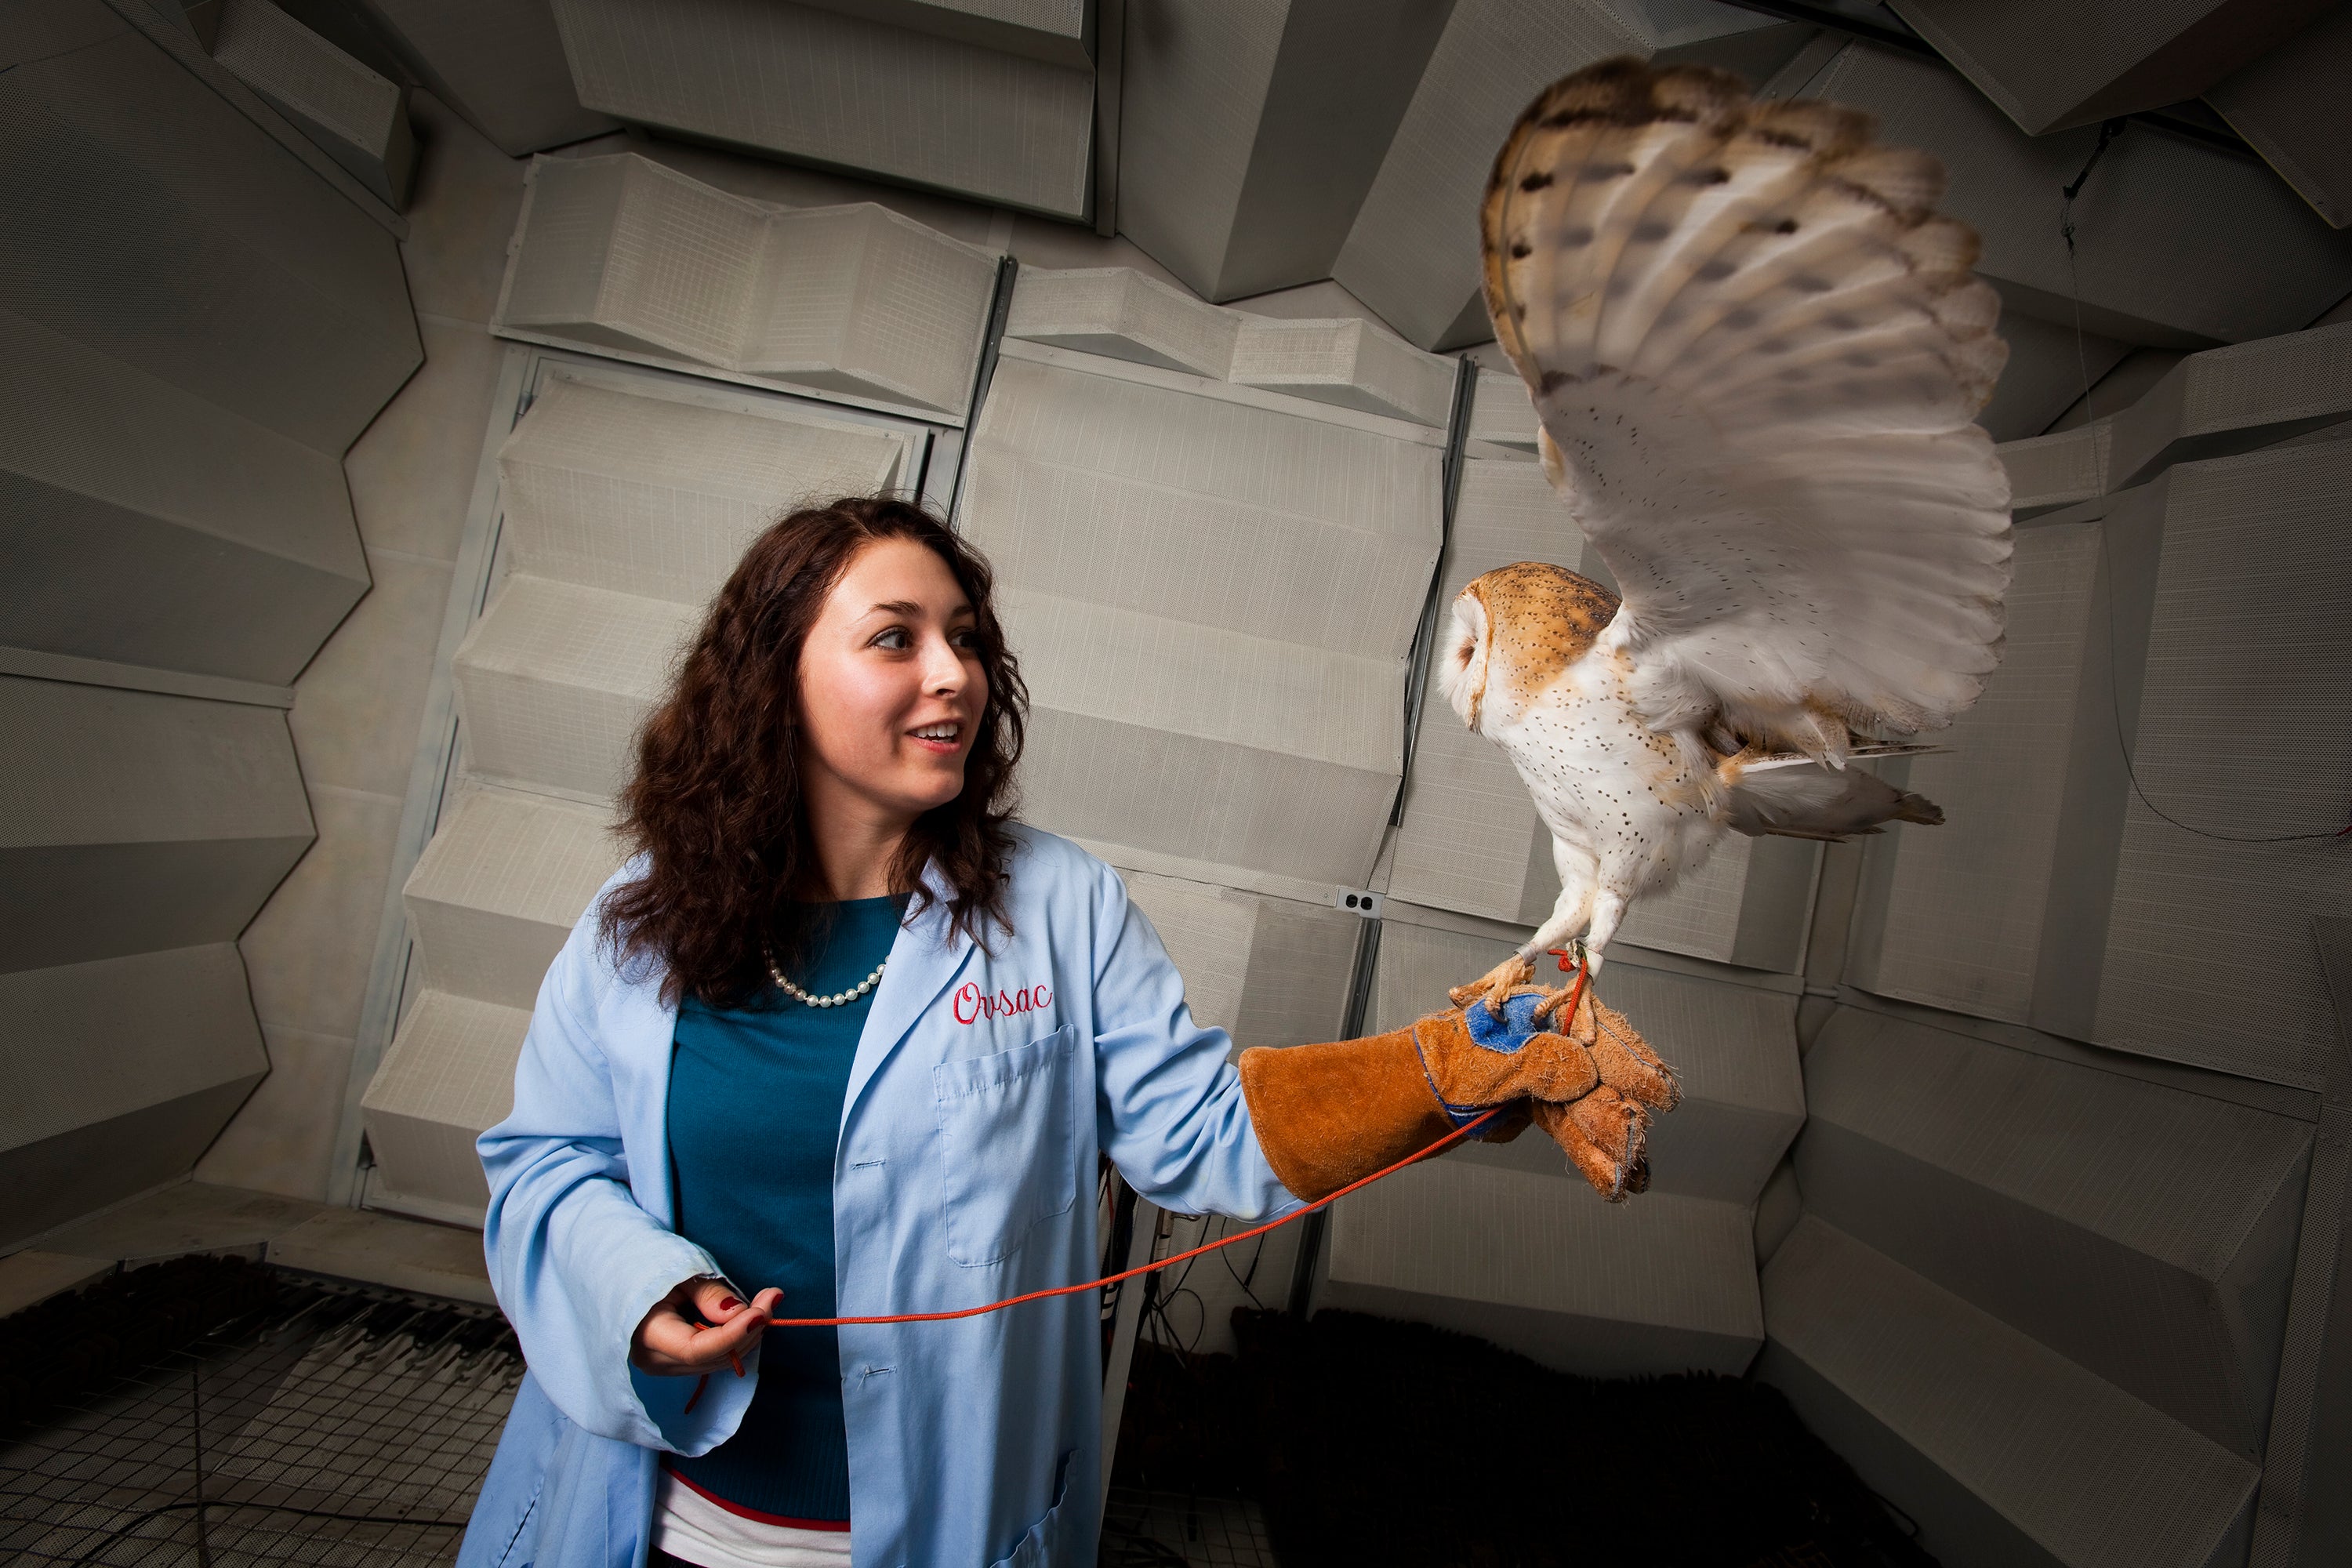 A researcher holds an owl whose wings are extended.